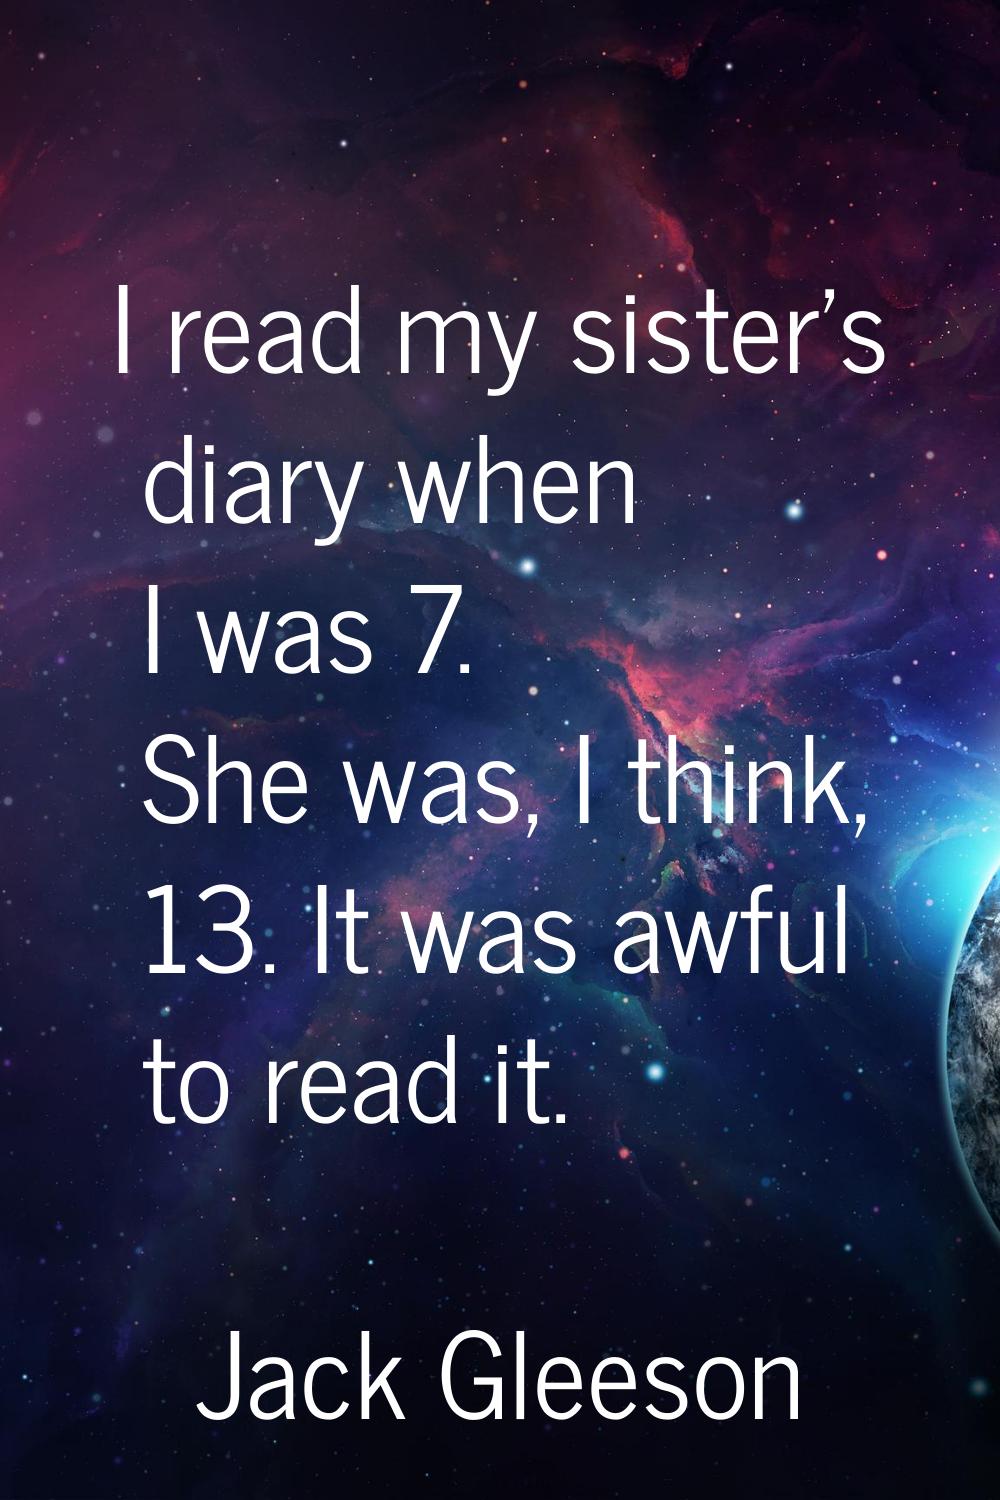 I read my sister's diary when I was 7. She was, I think, 13. It was awful to read it.